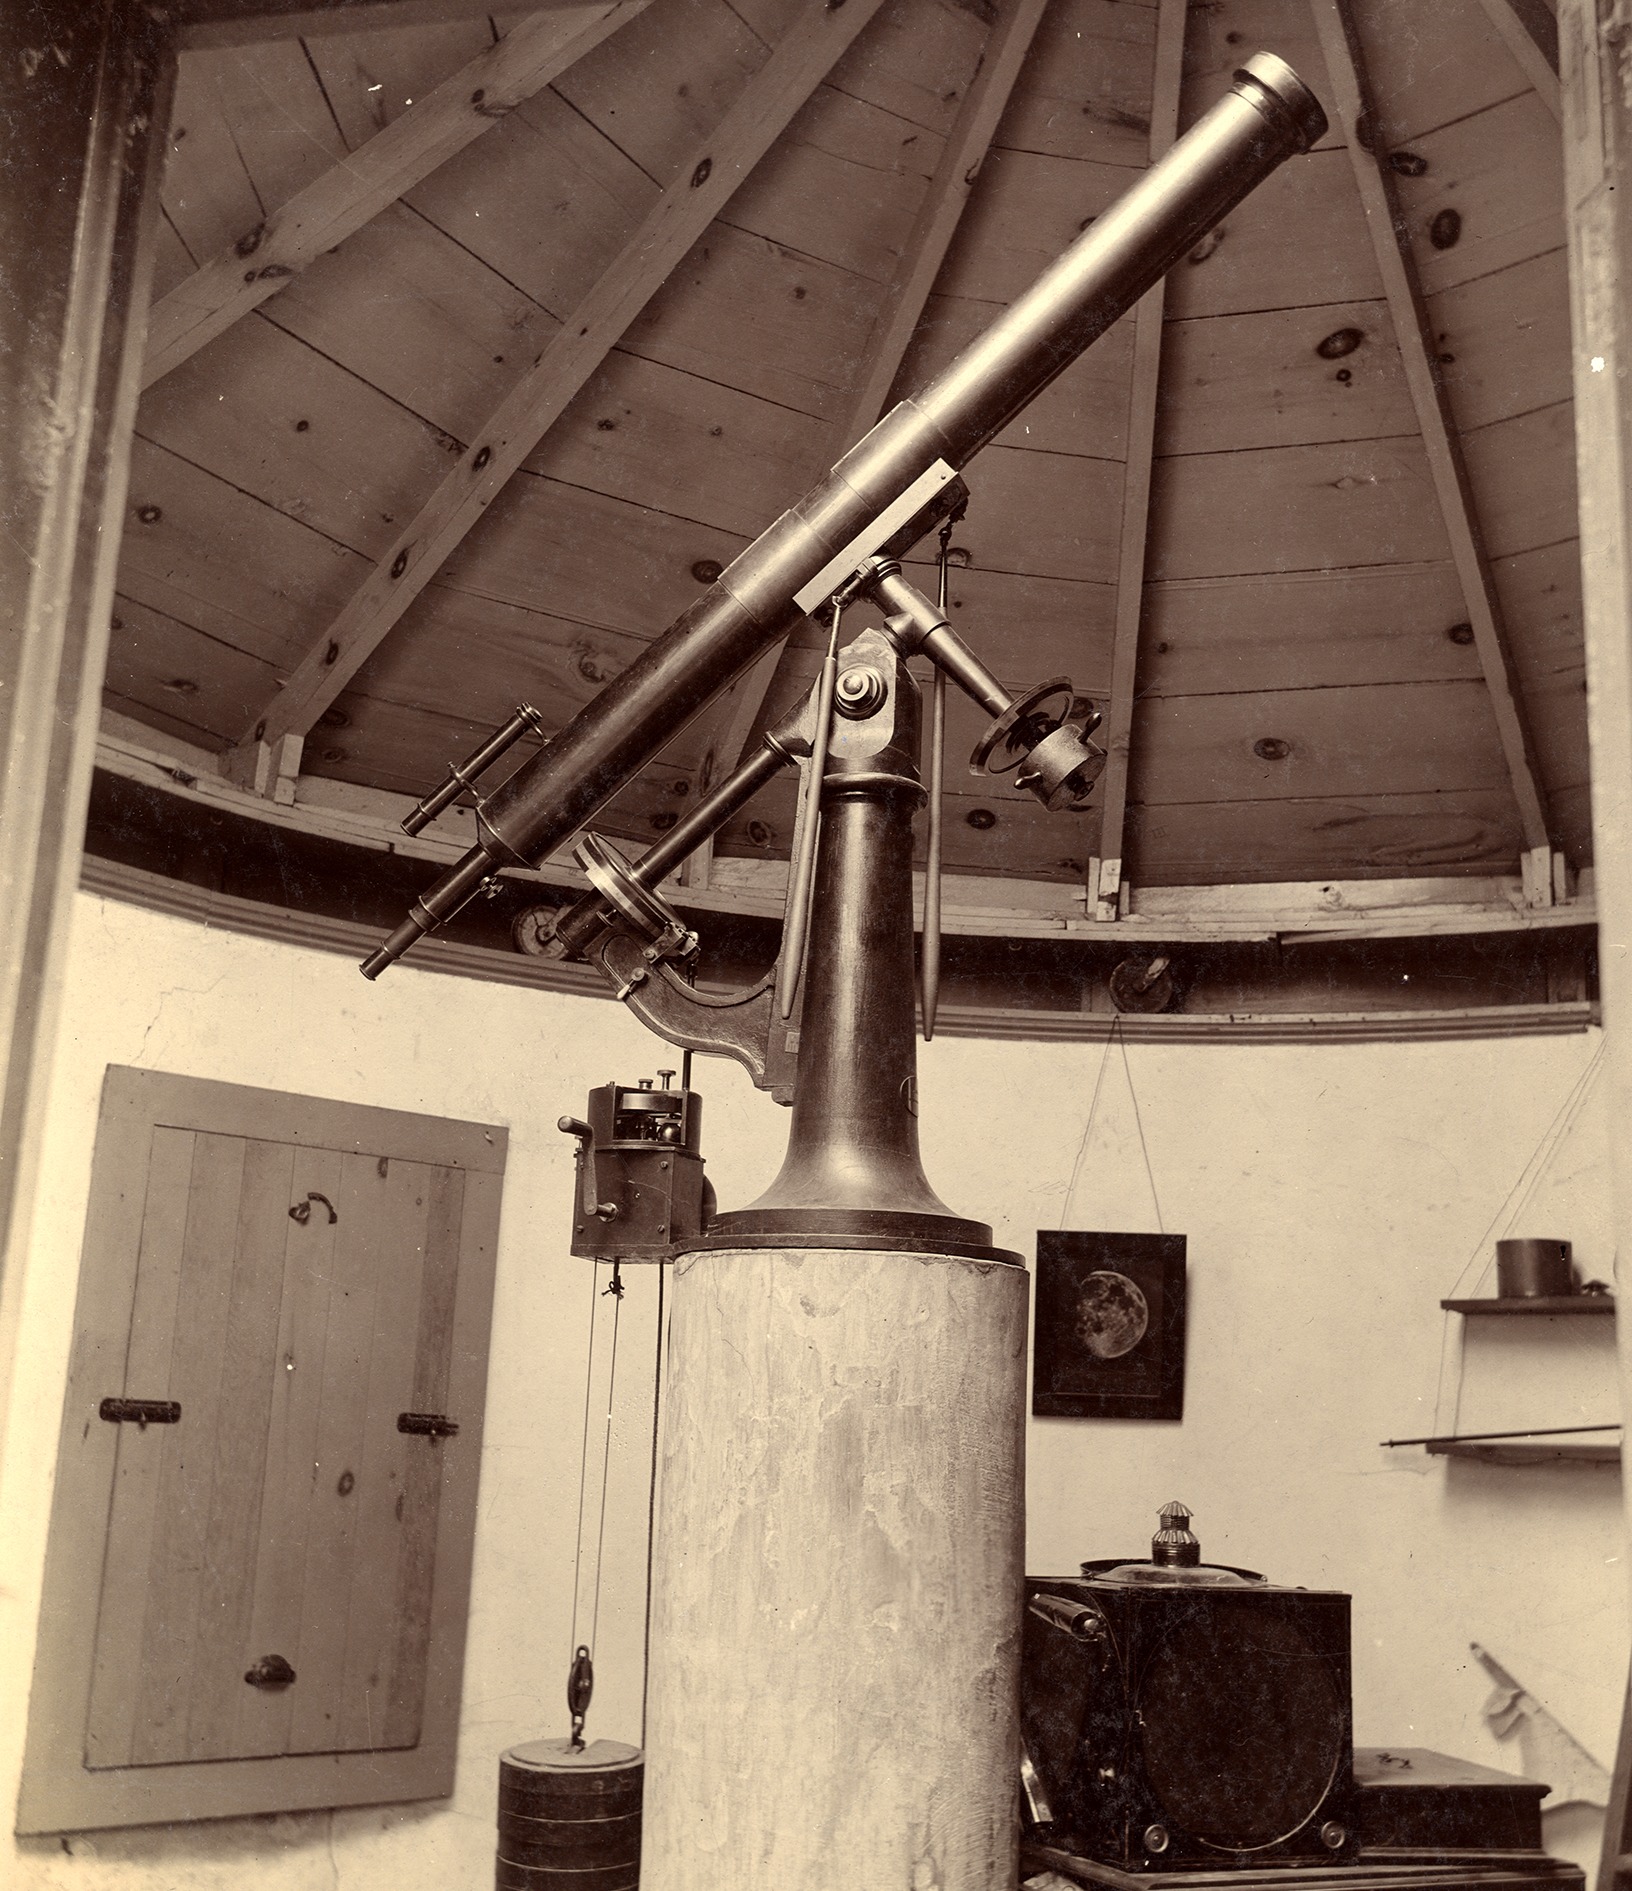 A black and white photograph of a telescope mounted on a long pole. On the left is a wooden window with shutters closed.The back wall has a moon painting and various small shelves and objects